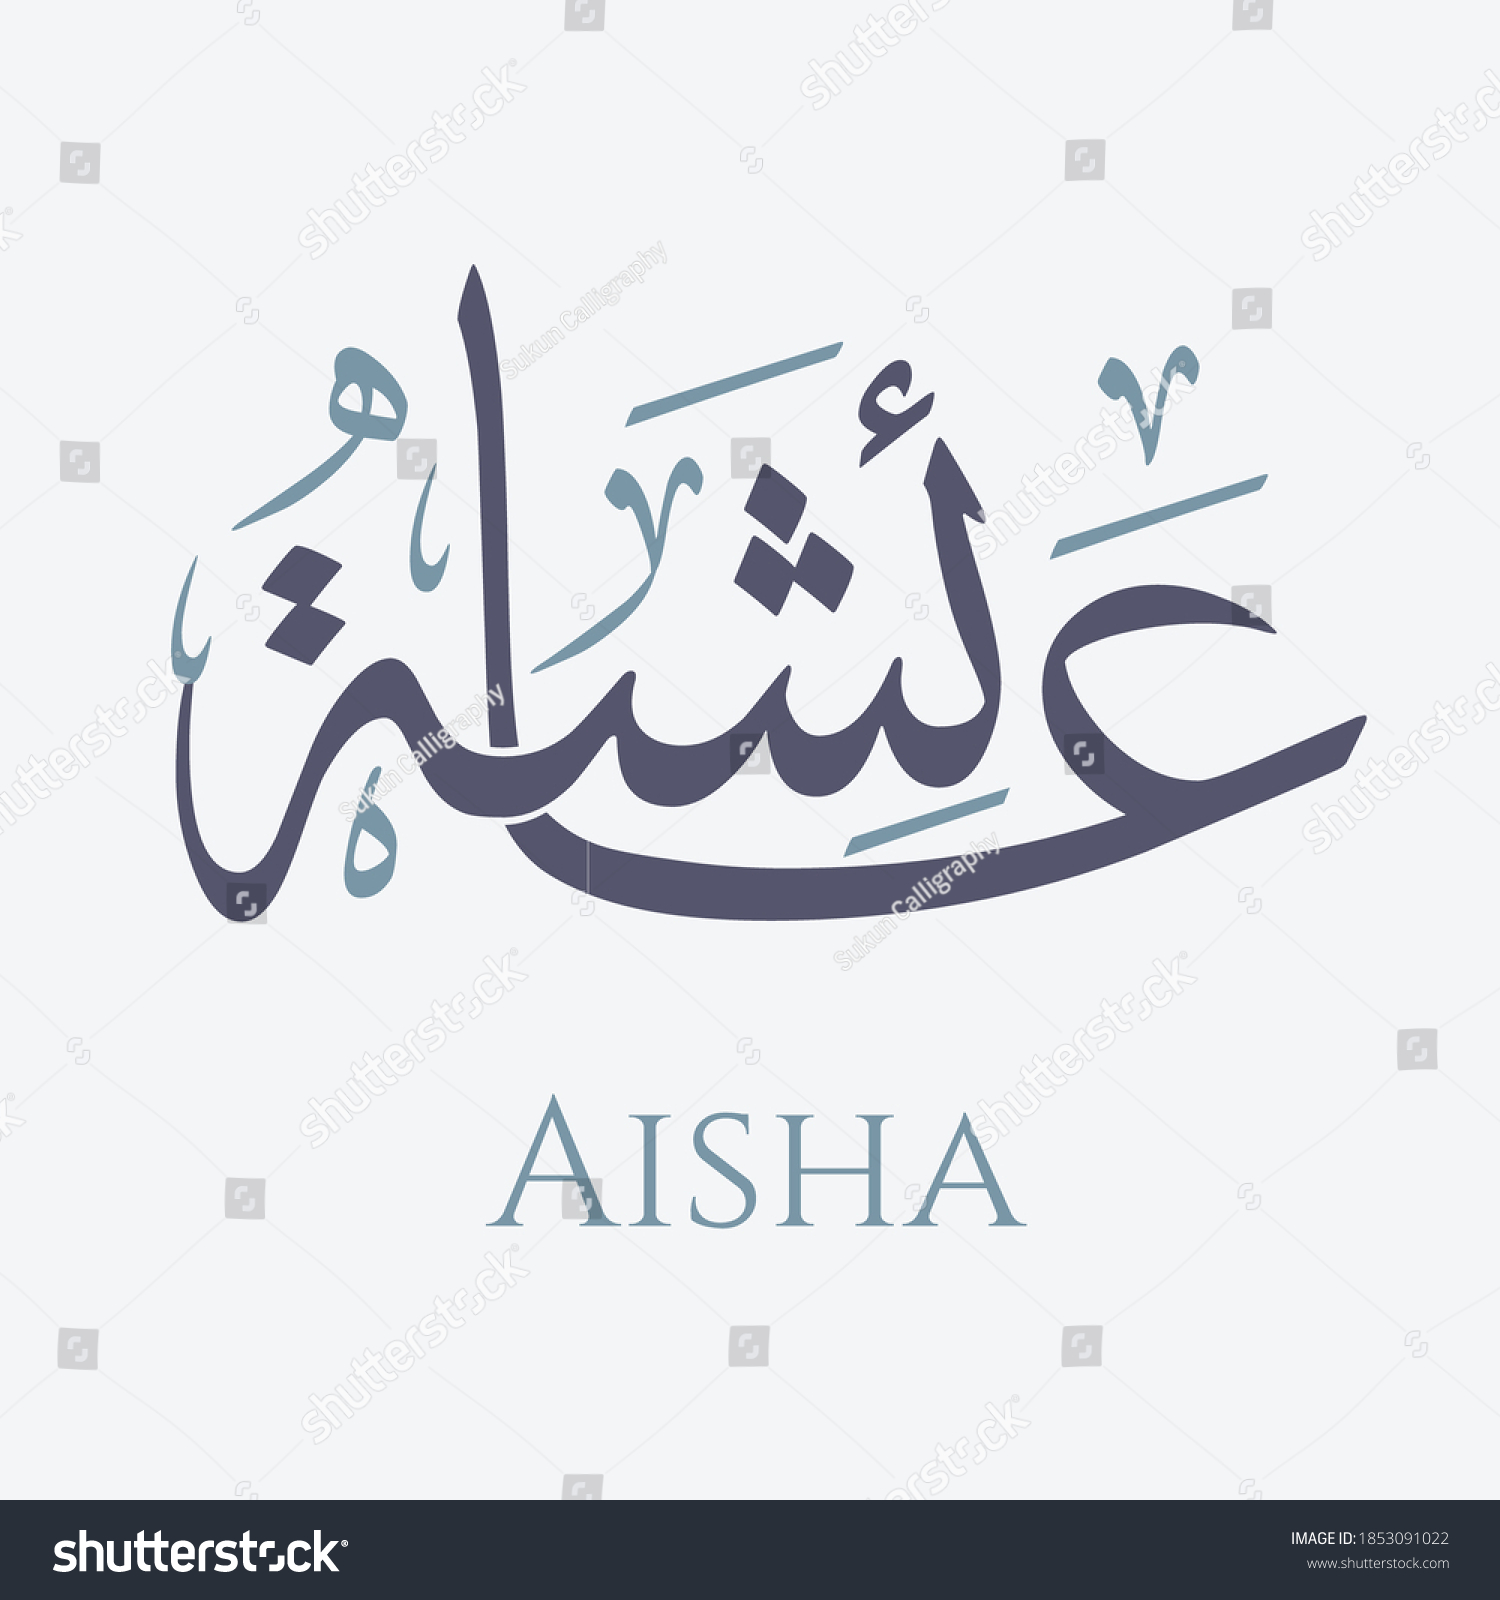 SVG of Creative Arabic Calligraphy. (Aisha) In Arabic name means life. Logo vector illustration. svg